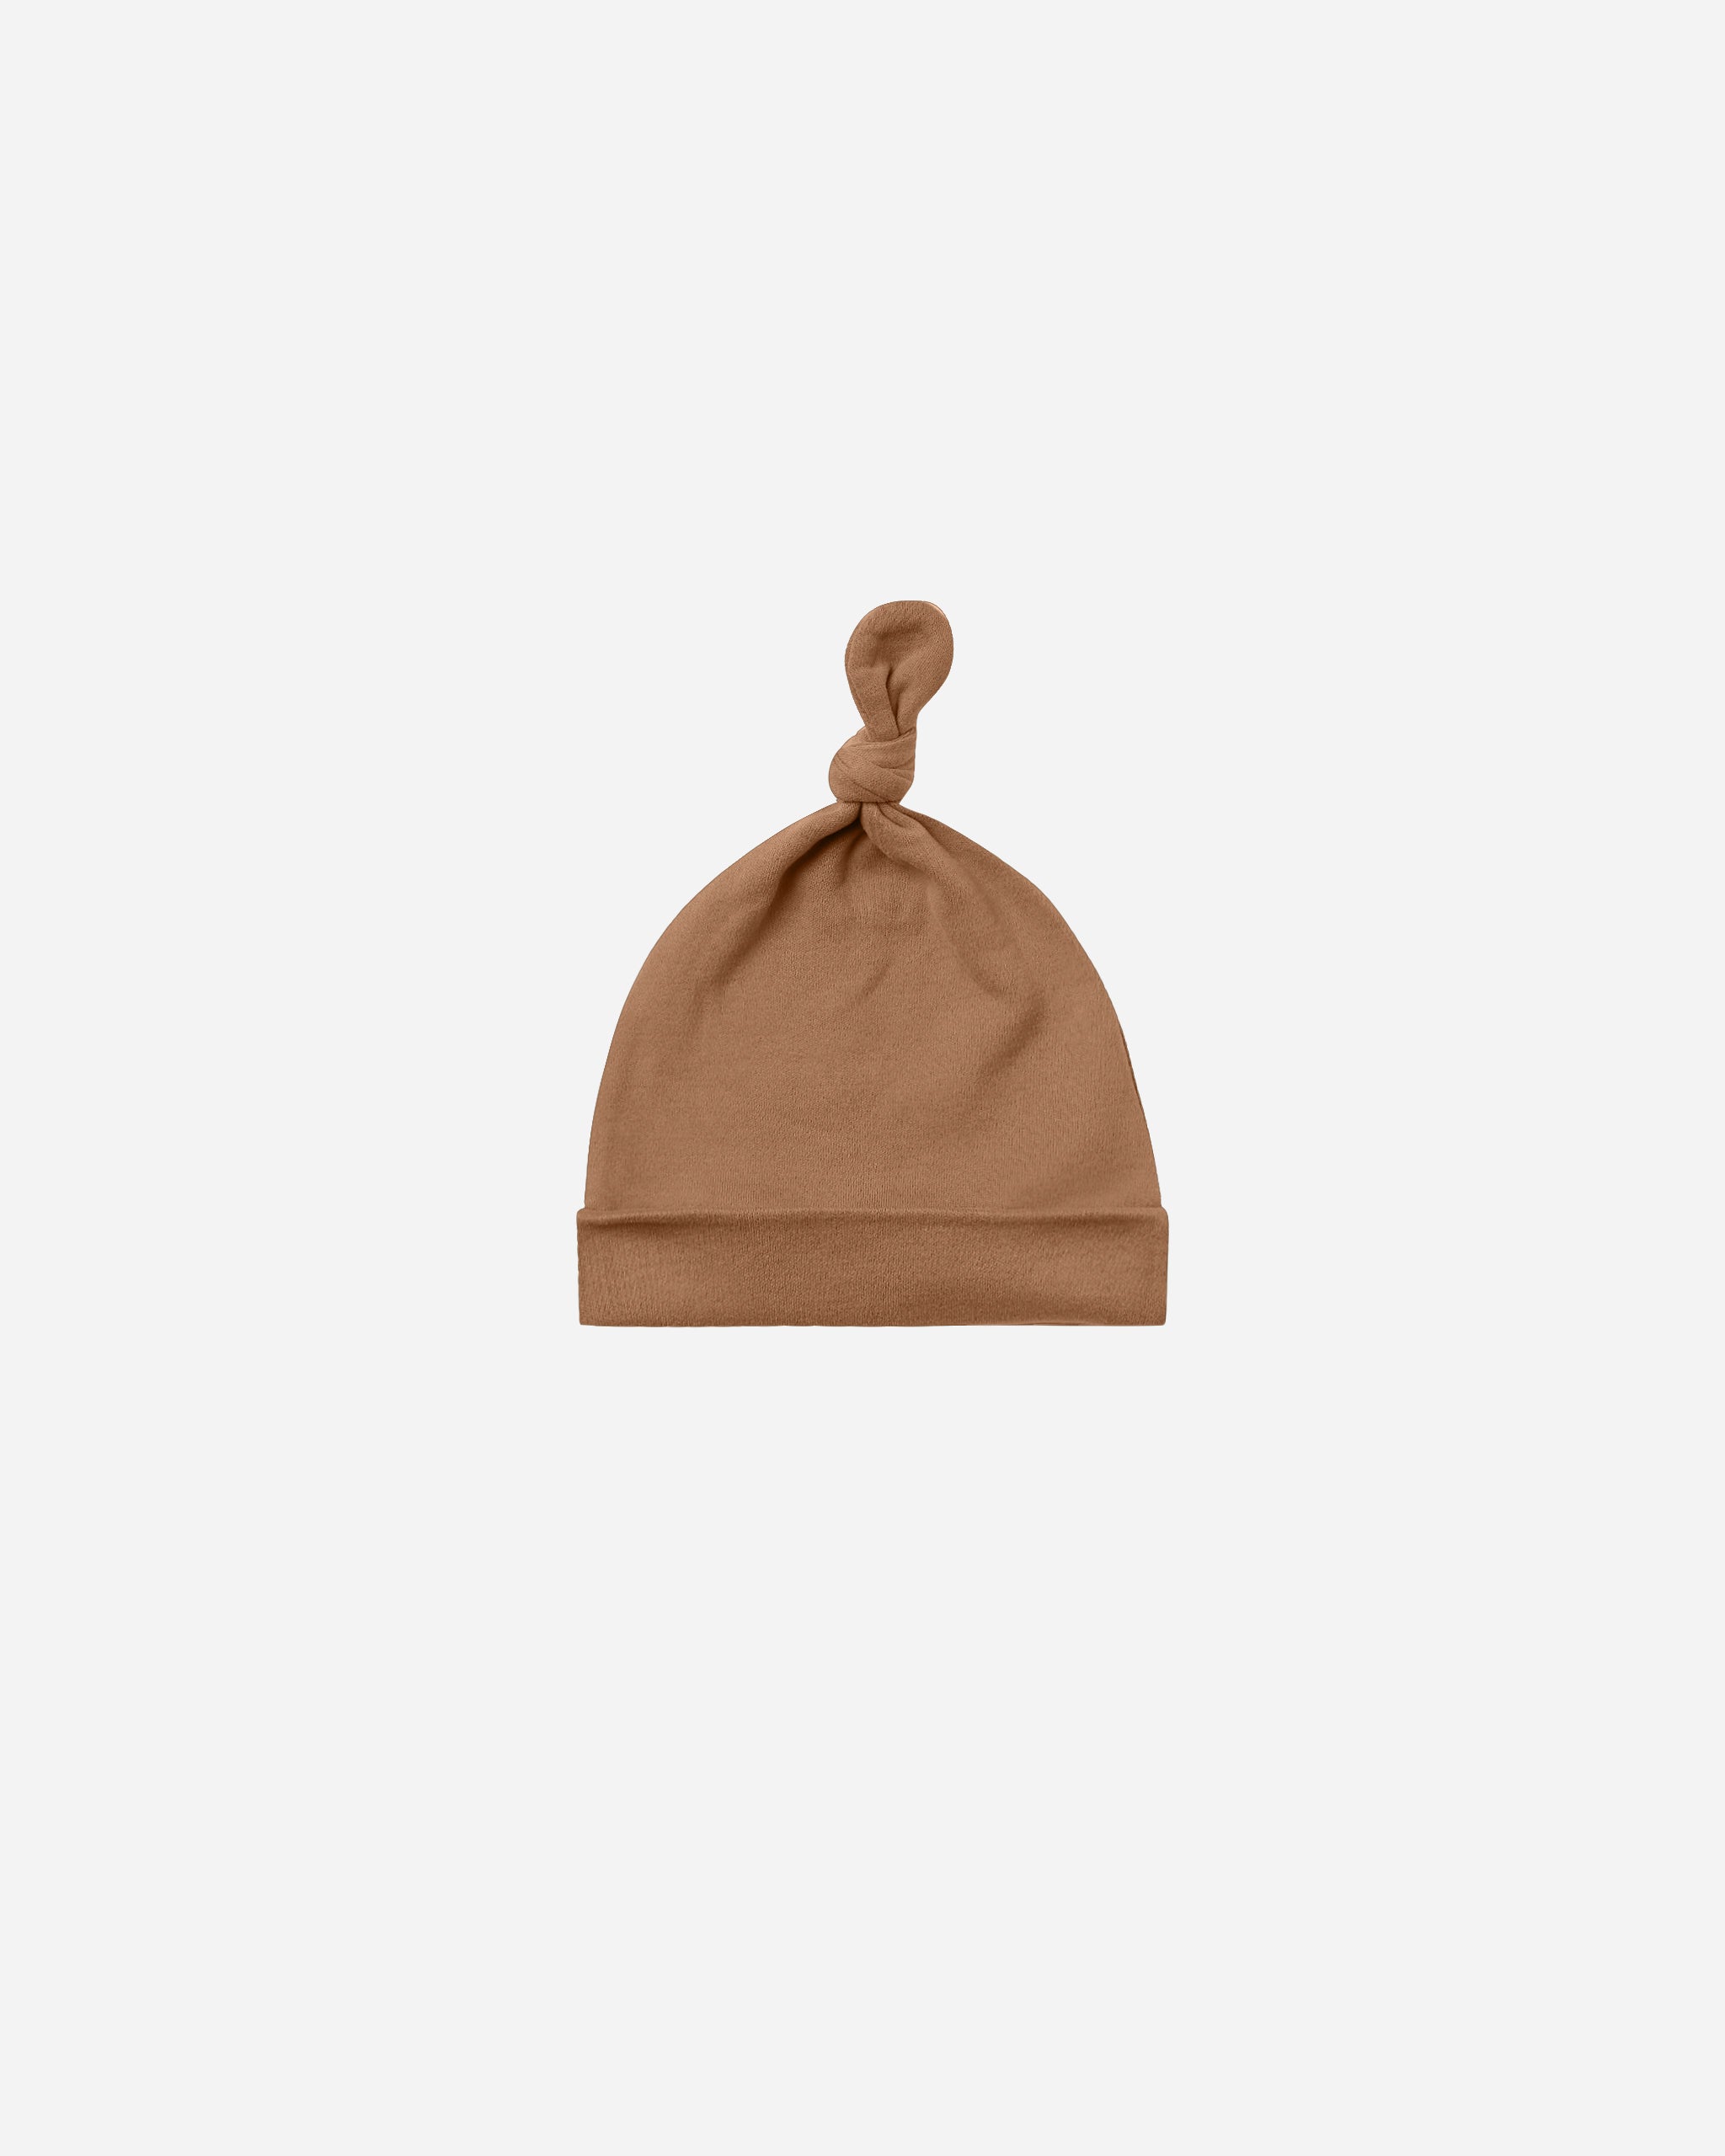 Knotted Baby Hat || Cinnamon - Rylee + Cru | Kids Clothes | Trendy Baby Clothes | Modern Infant Outfits |